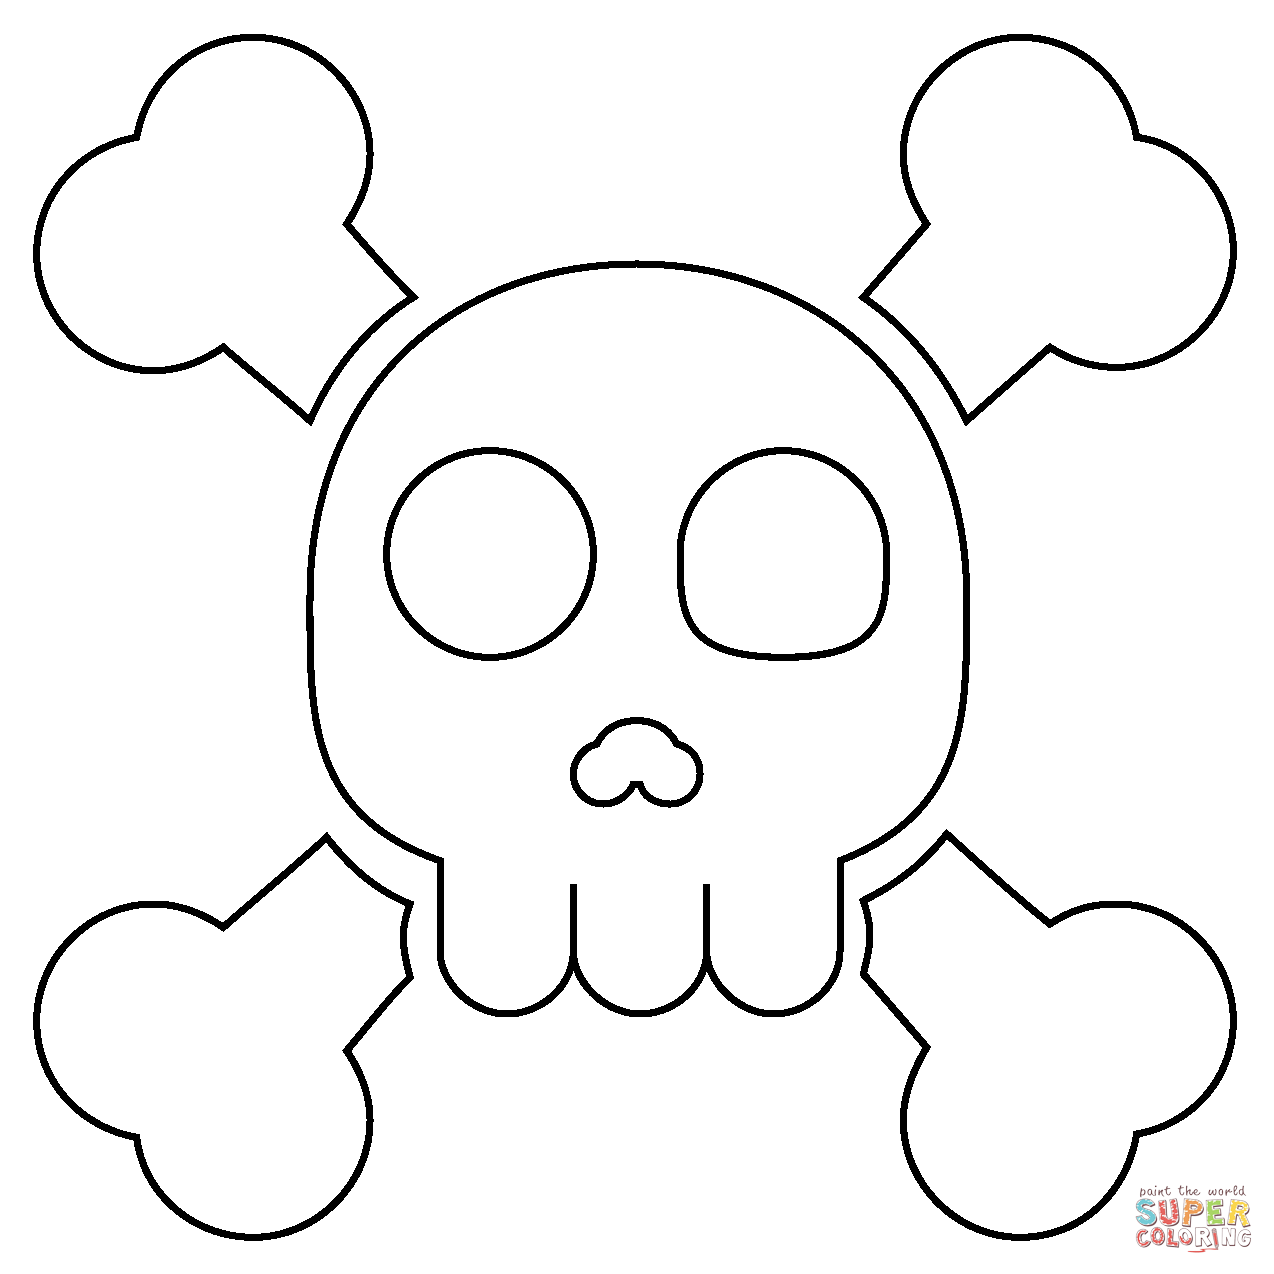 Skull and crossbones emoji coloring page free printable coloring pages